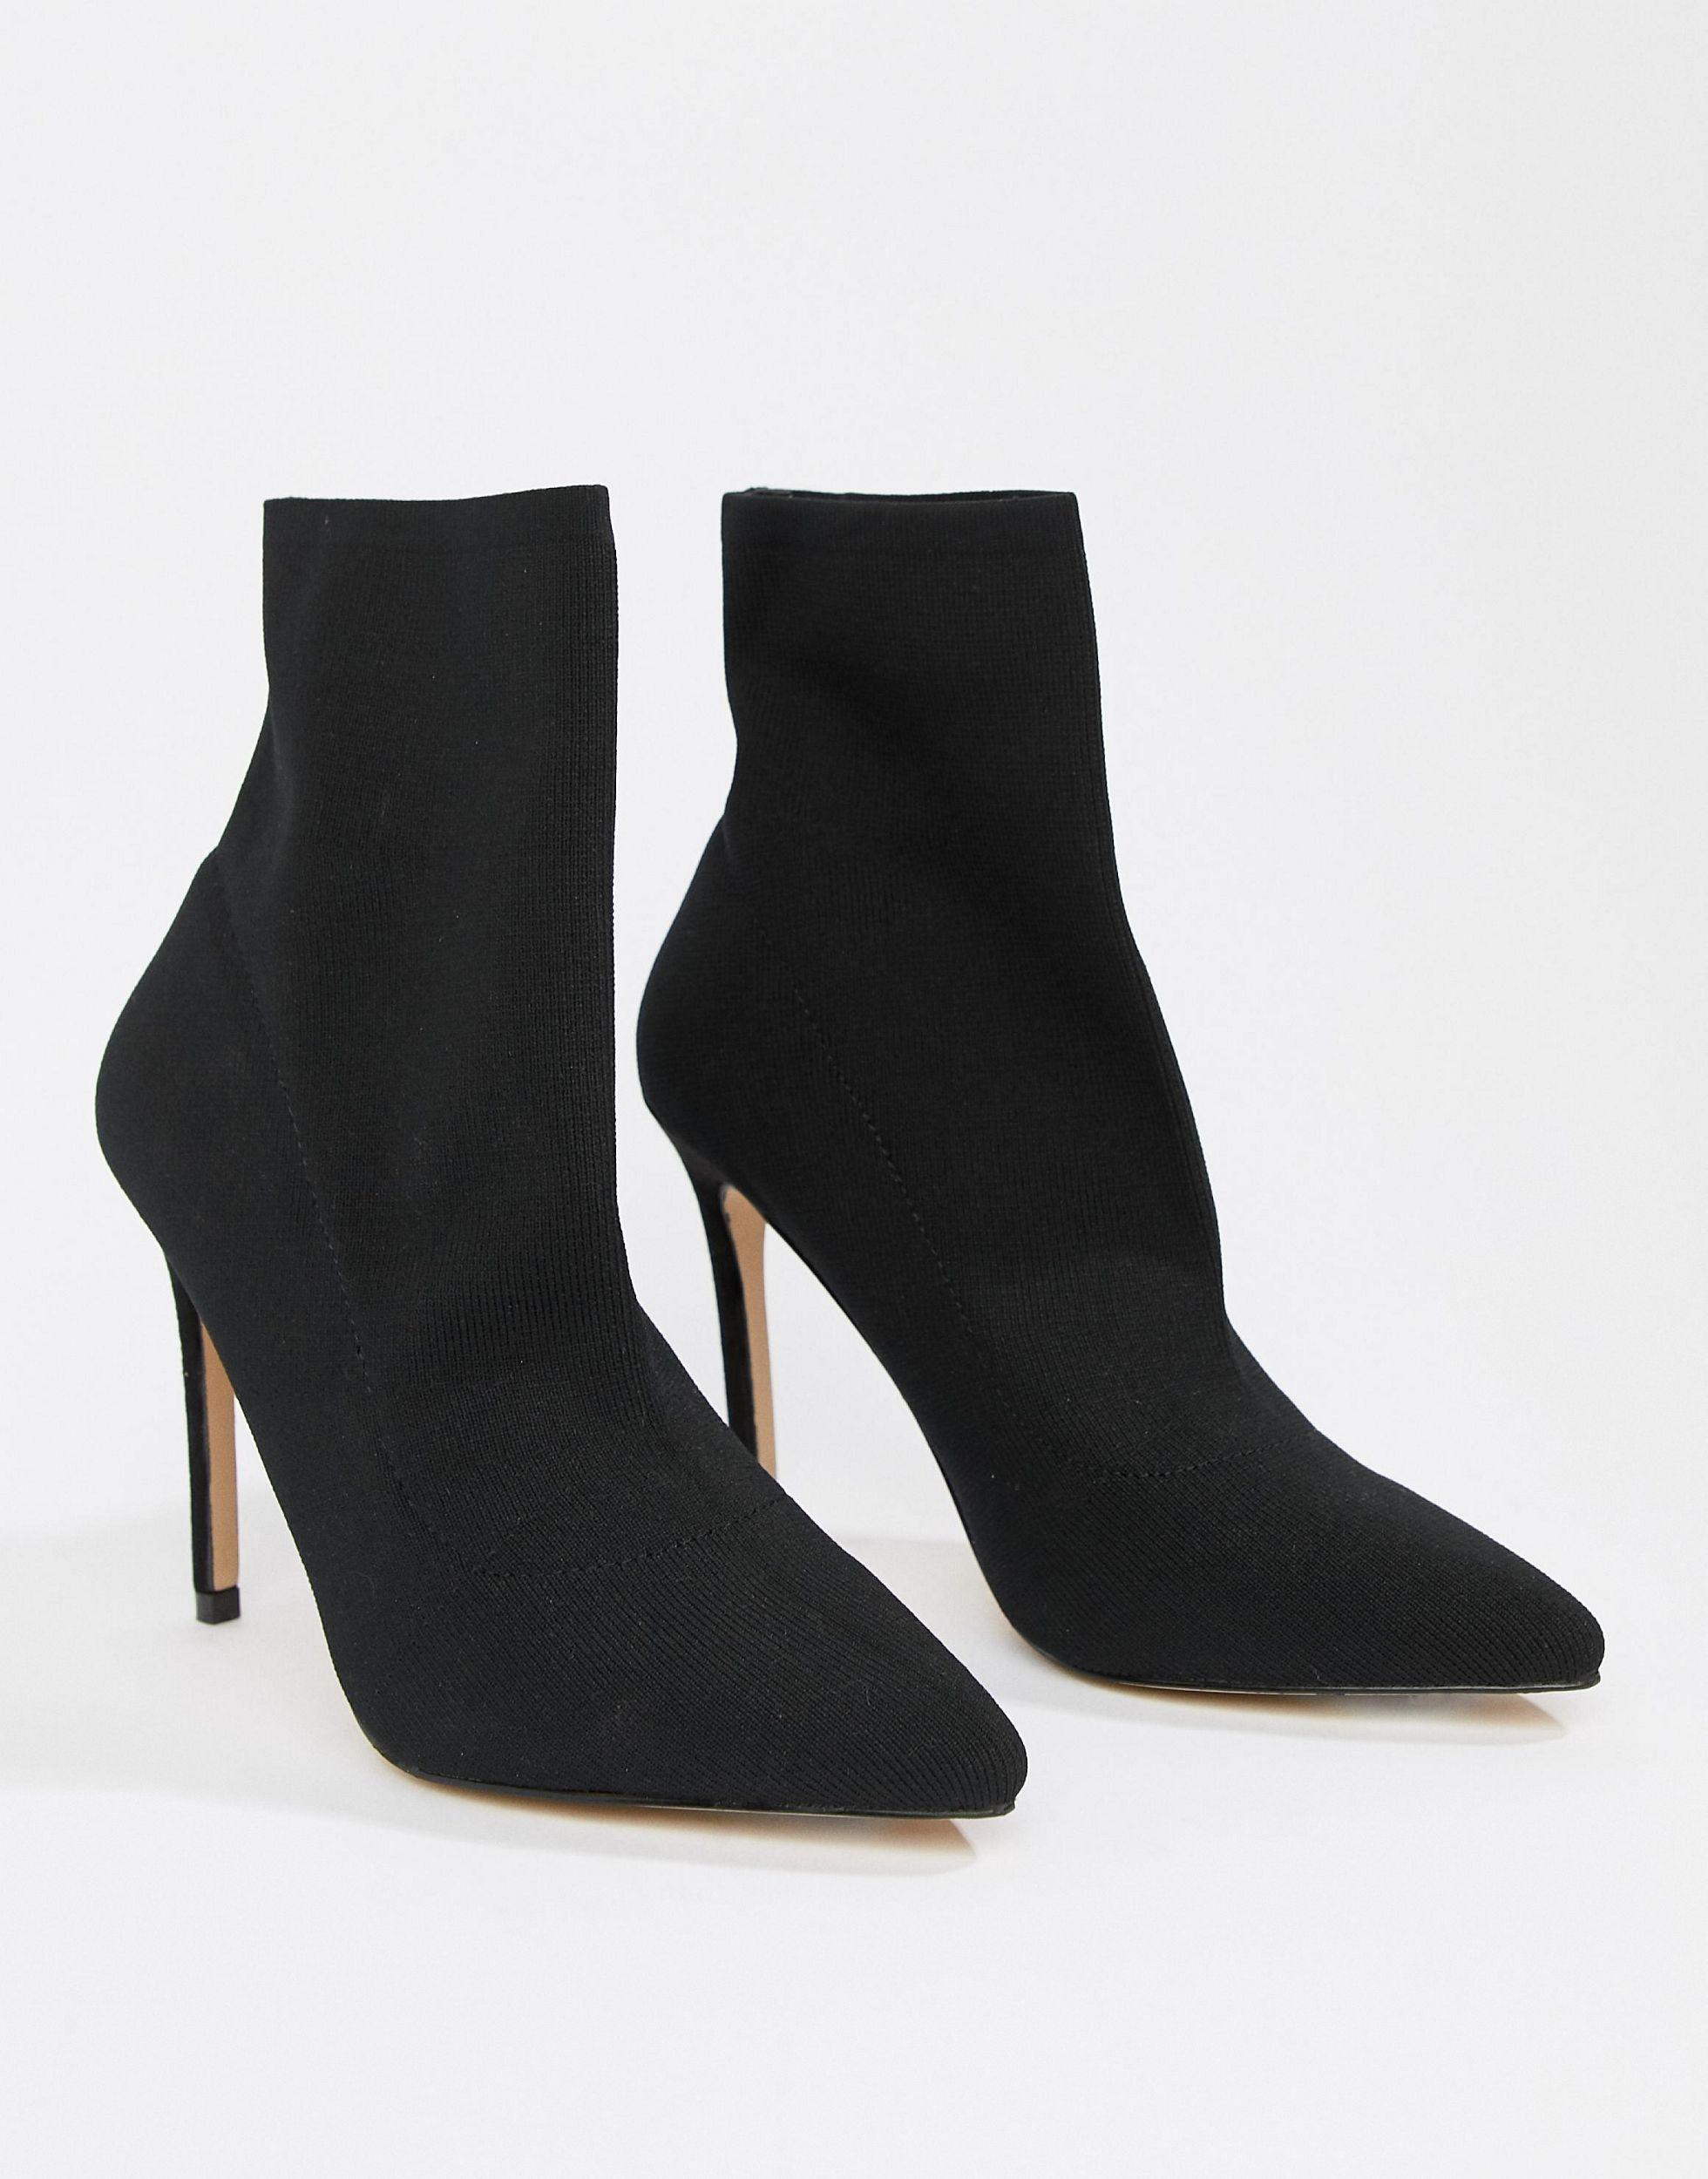 Lipsy Knitted Sock Boot in Black - Lyst